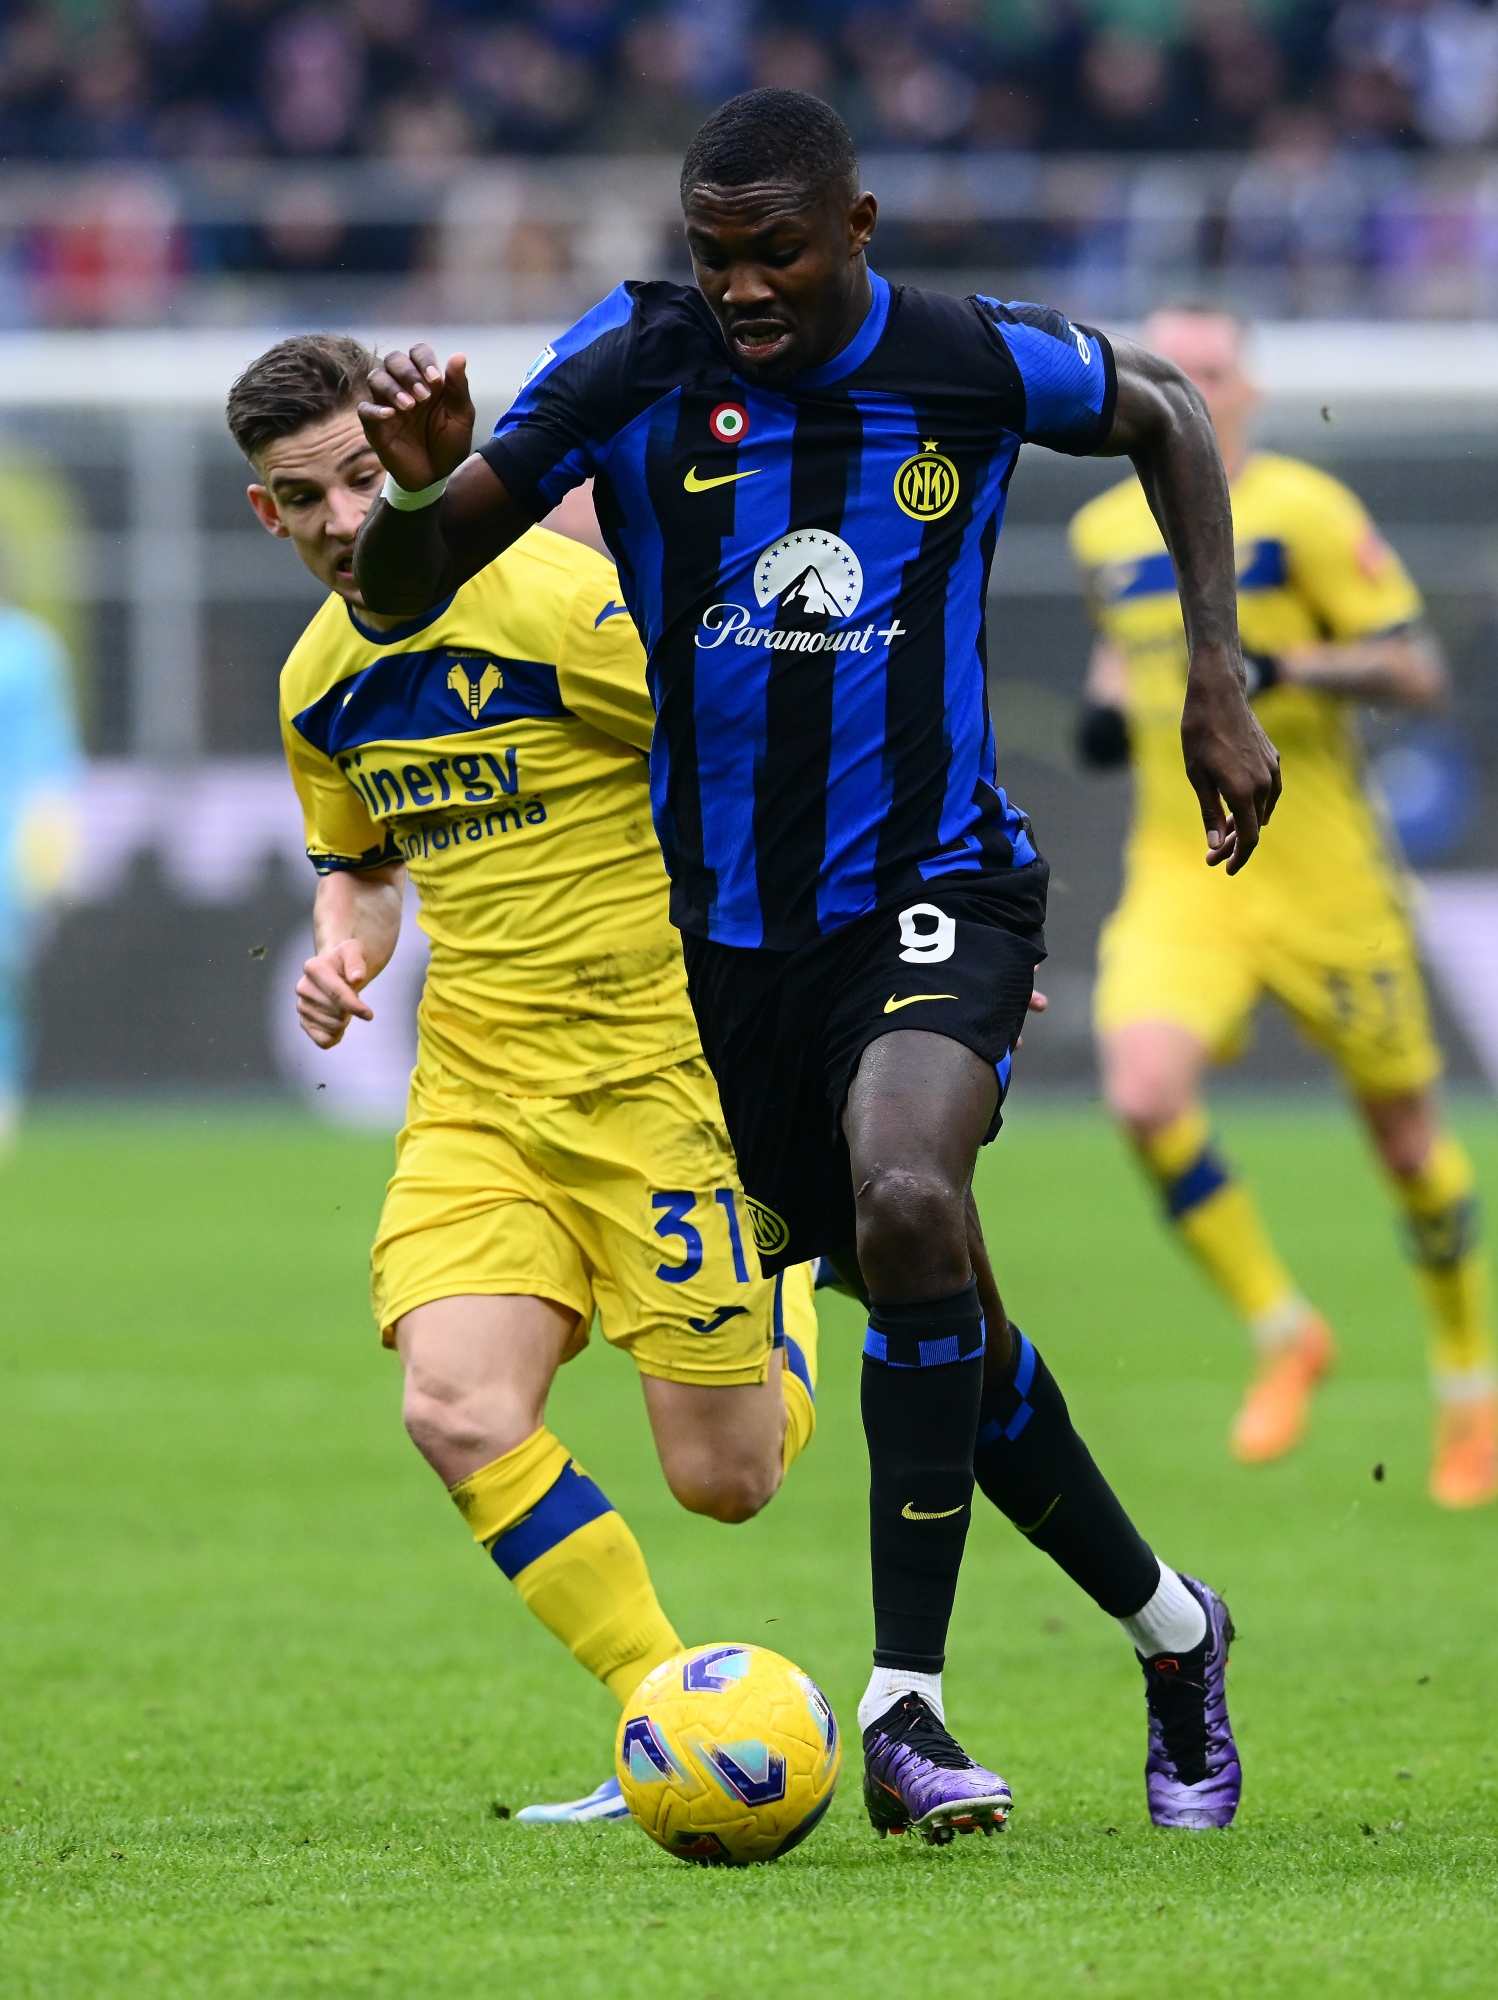 MILAN, ITALY - JANUARY 06: Marcus Thuram of FC Internazionale competes for the ball with Tomas Suslov of Hellas Verona FC during the Serie A TIM match between FC Internazionale and Hellas Verona FC at Stadio Giuseppe Meazza on January 06, 2024 in Milan, Italy. (Photo by Mattia Pistoia - Inter/Inter via Getty Images)